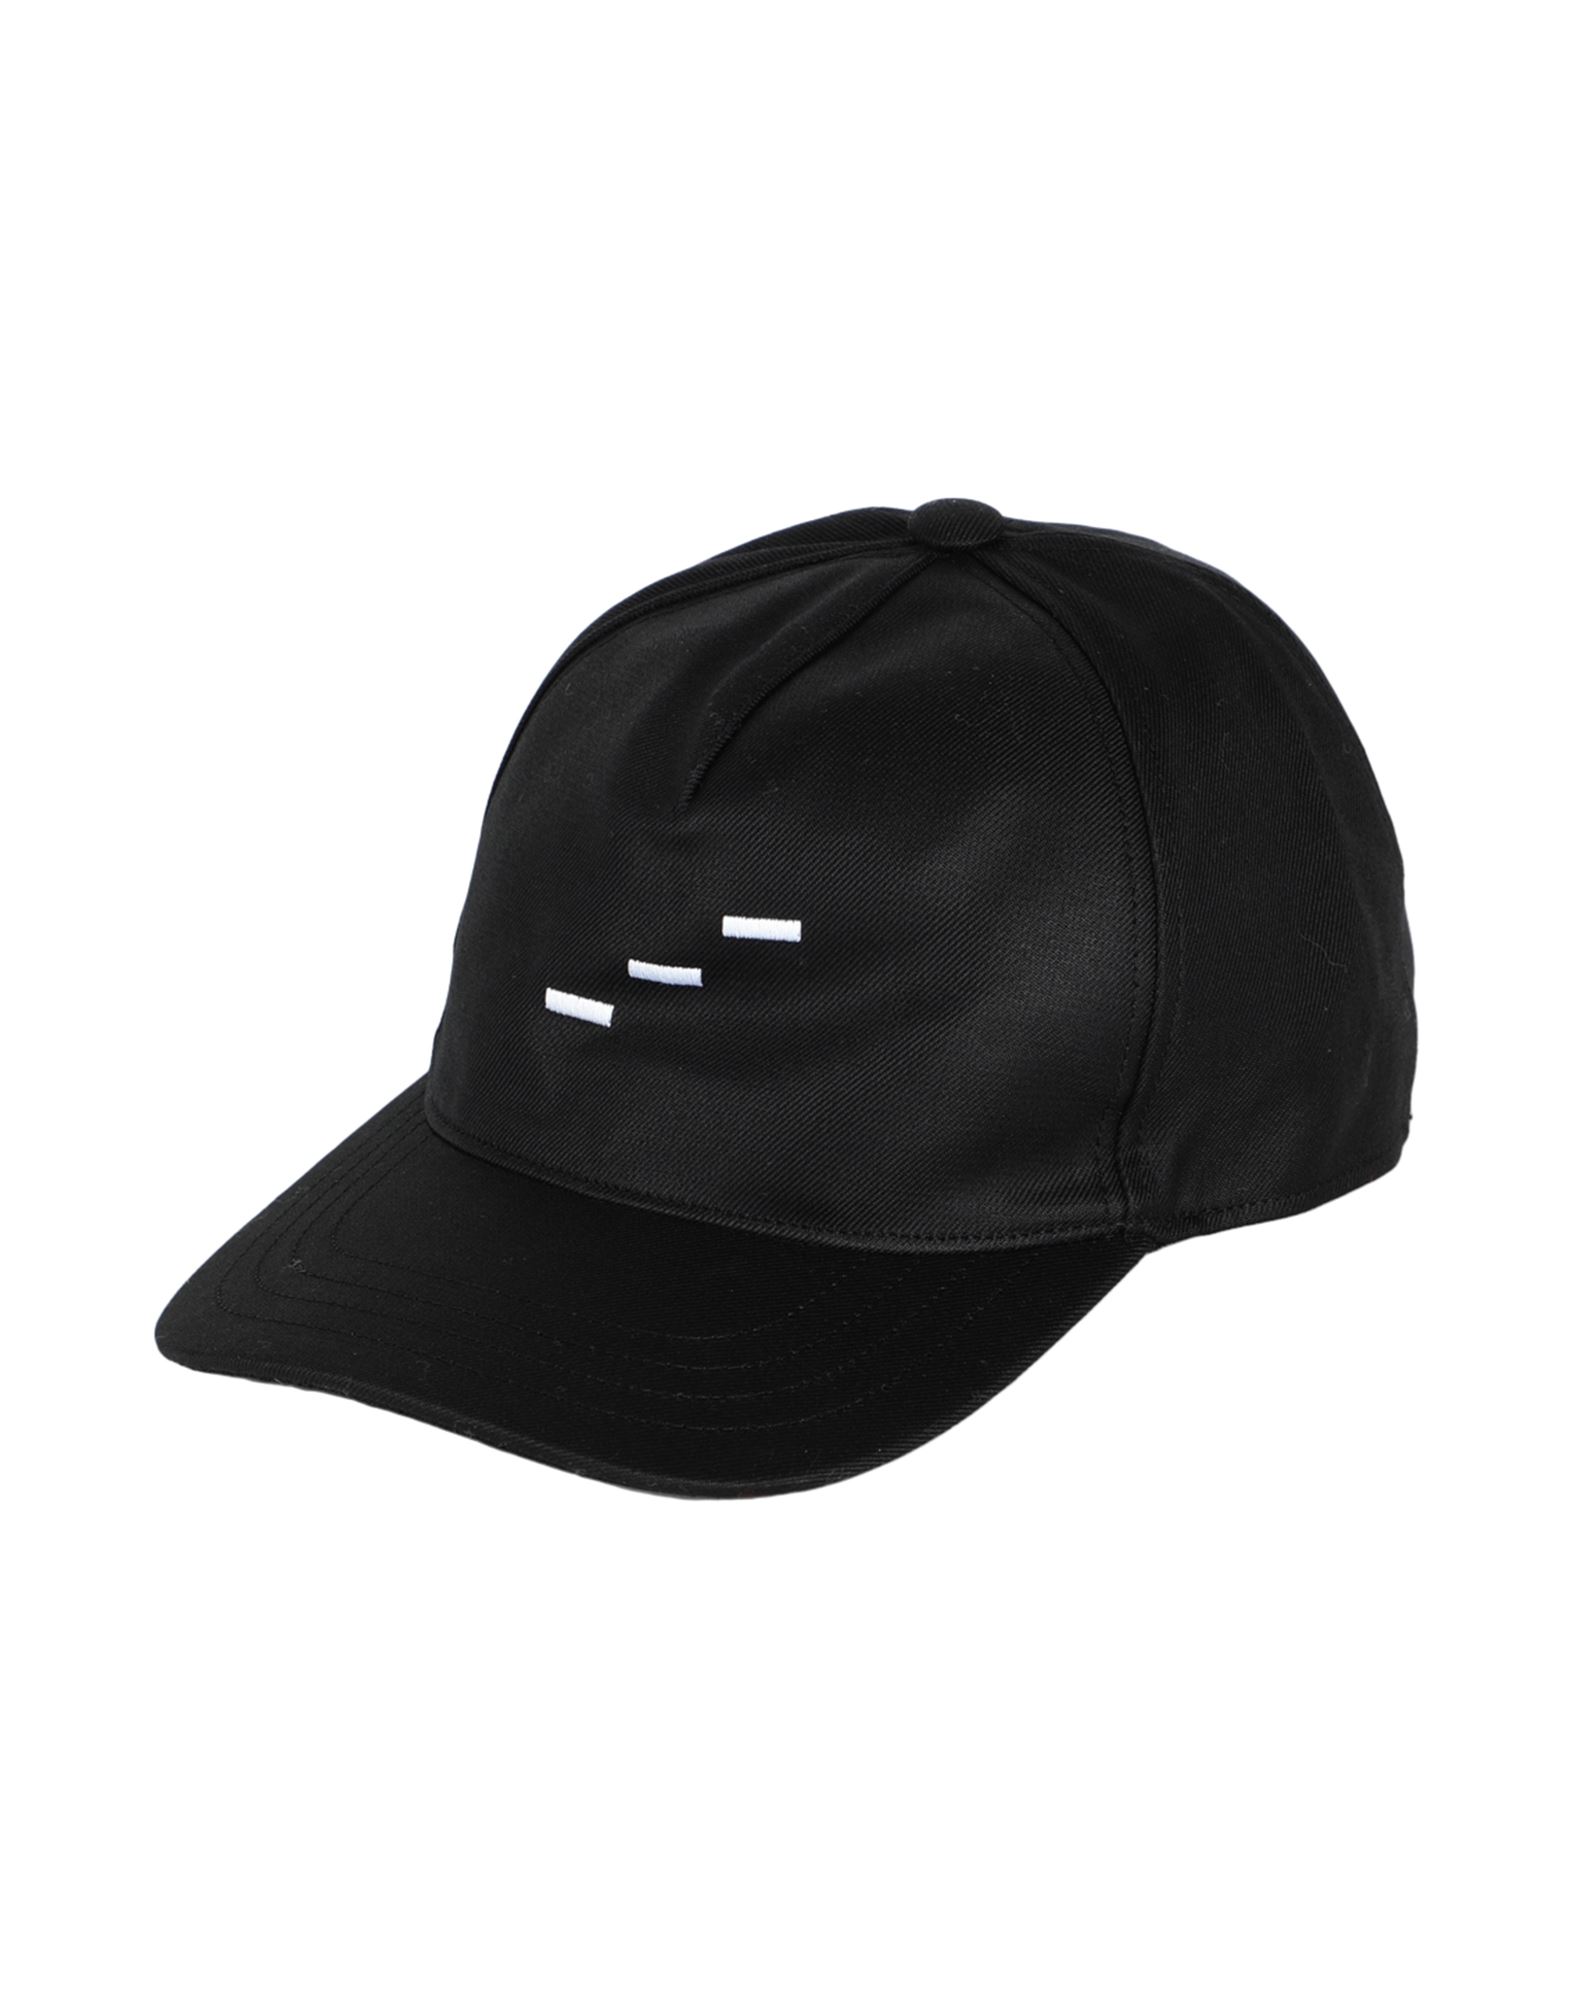 Anti-do-to Hats In Black